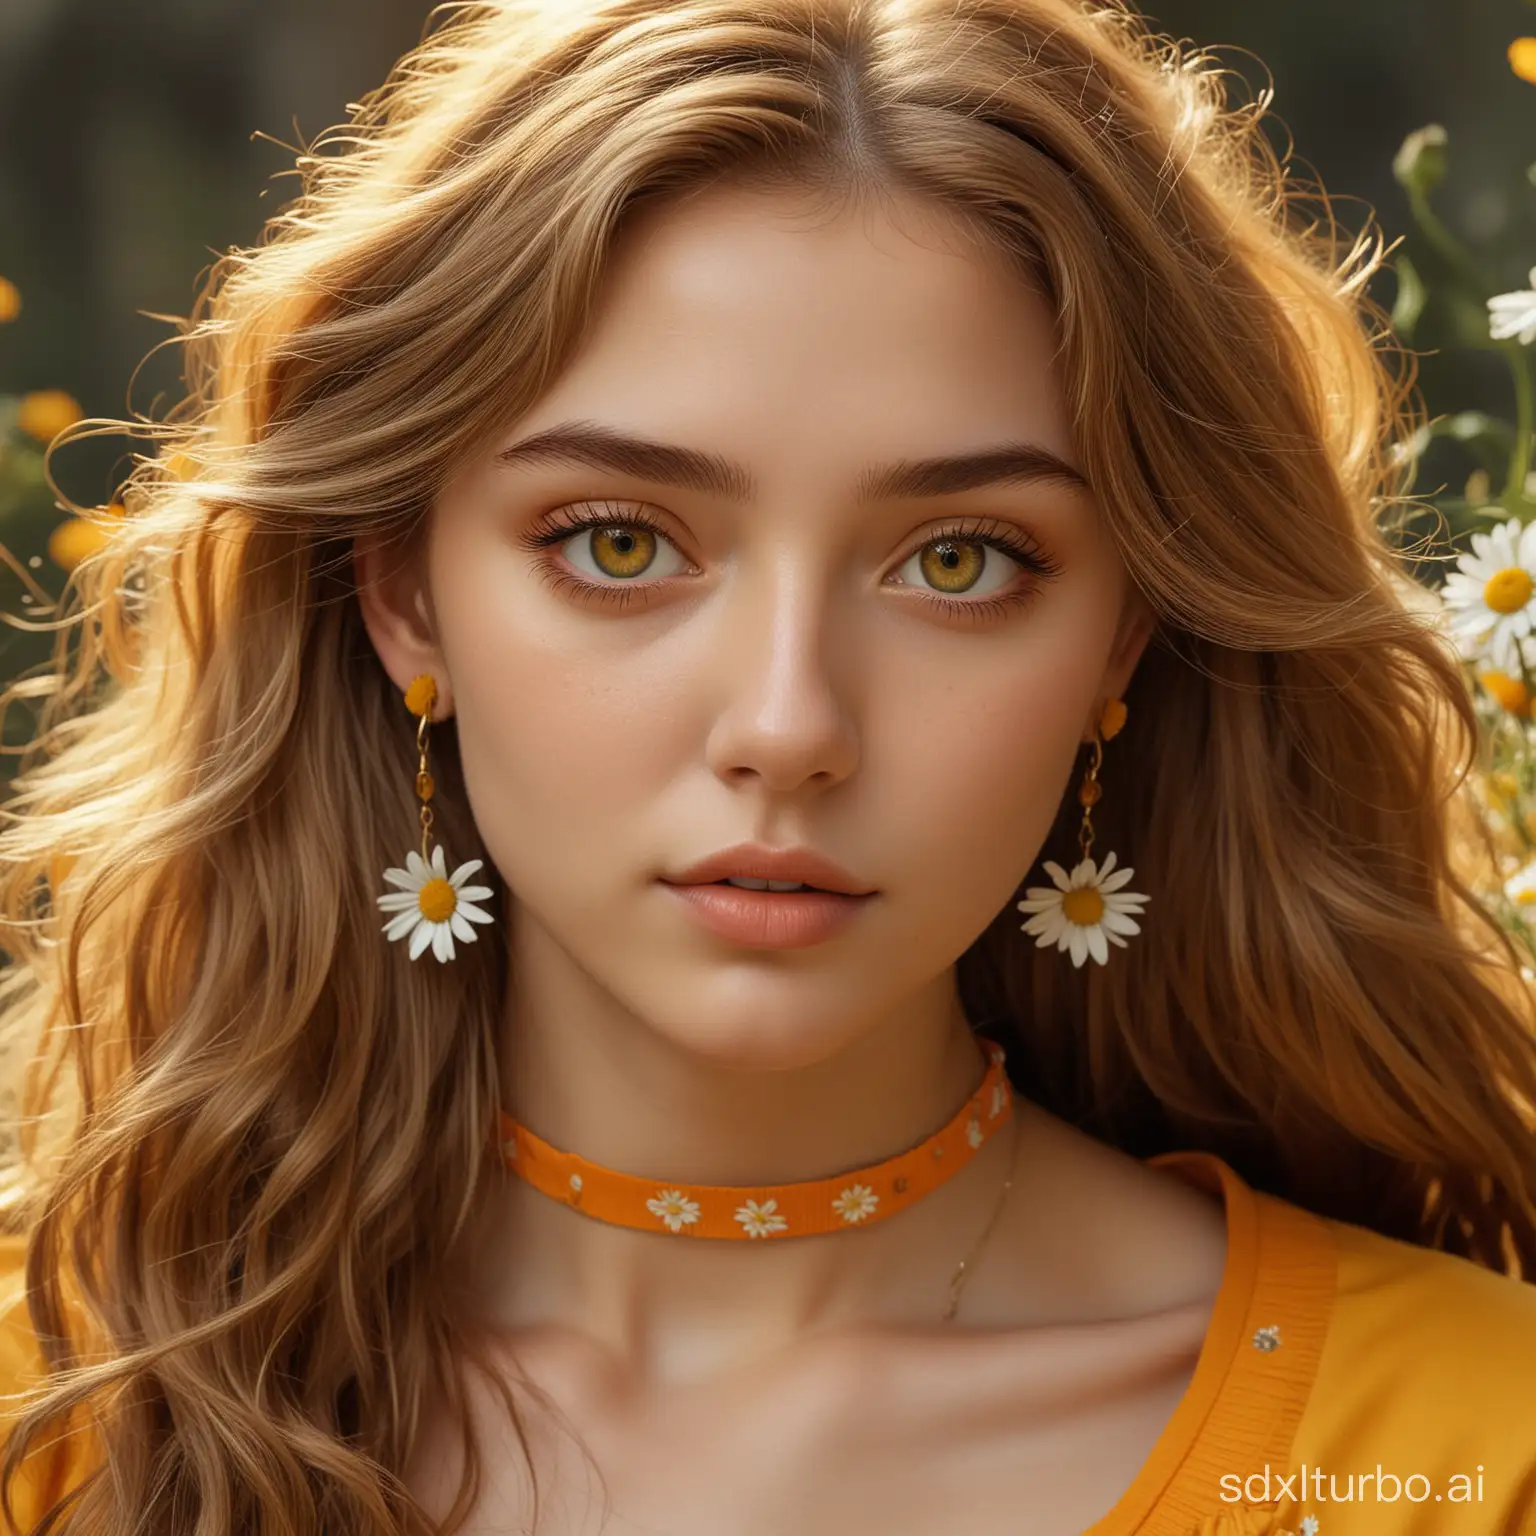 Supreme quality, masterpiece, a girl, light brown long hair, slightly curly, yellow earrings, choker, (orange attire), (exquisite hair portrayal), (exquisite yellow eyes portrayal), (exquisite facial features portrayal), solo, (daisies), portrait description, sense of brokenness